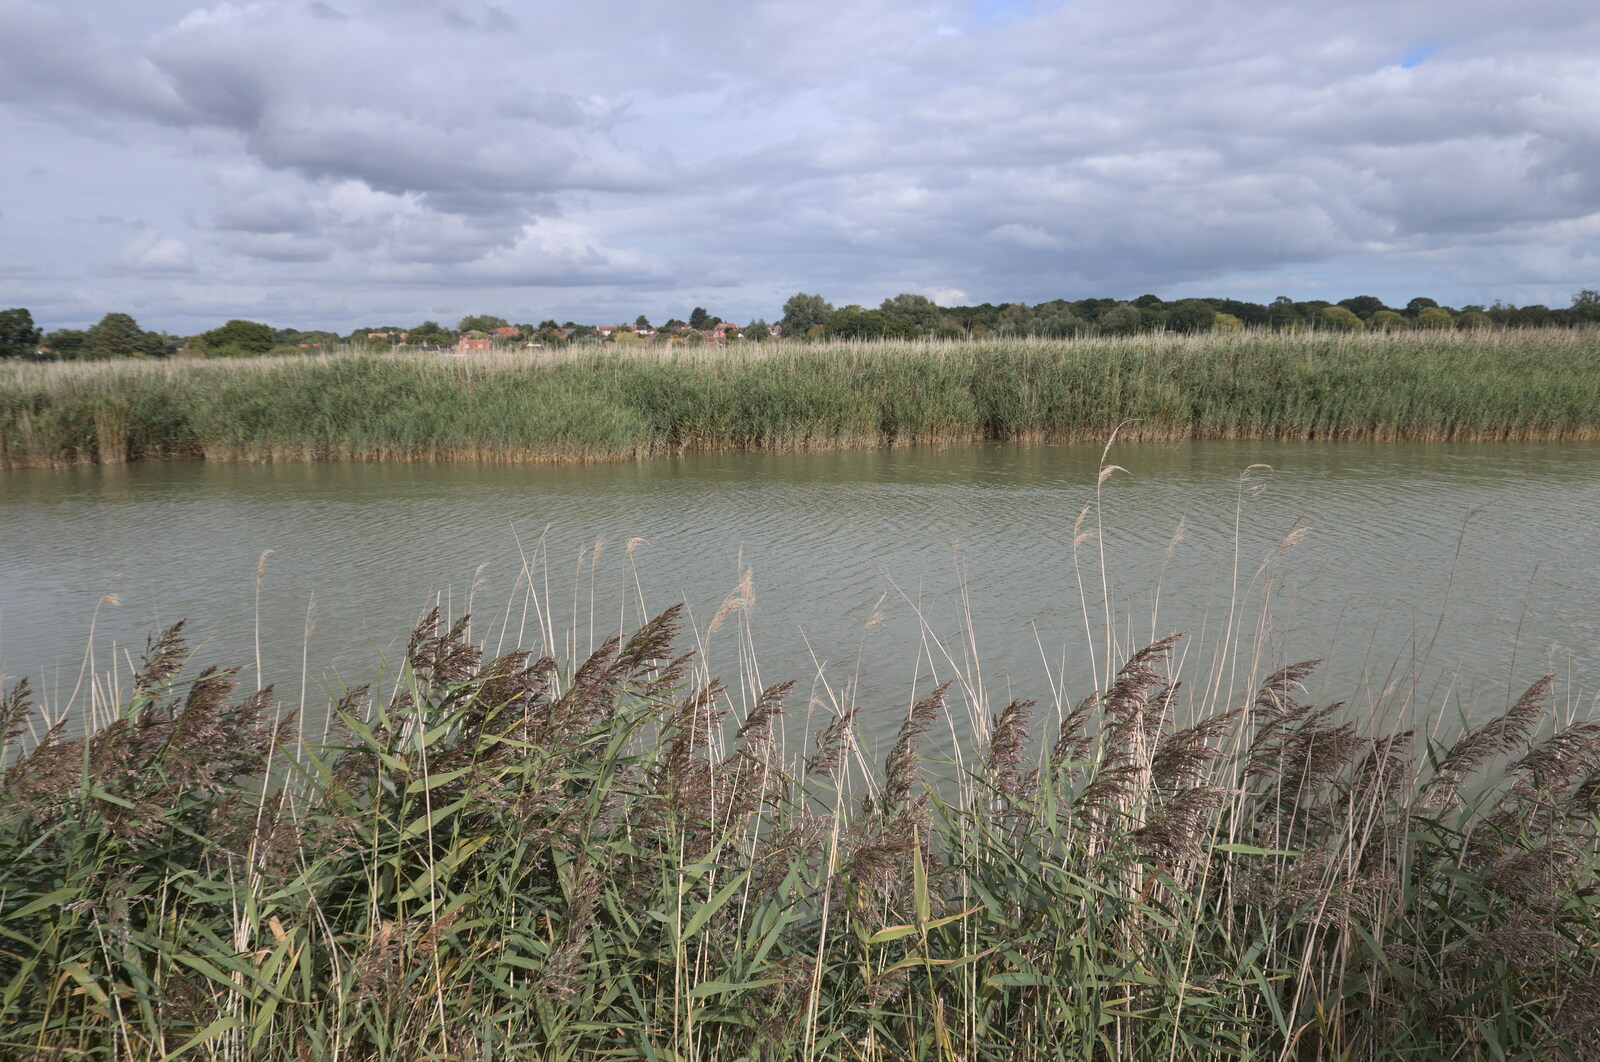 A view over the River Alde from The Aldeburgh Food Festival, Snape Maltings, Suffolk - 25th September 2022